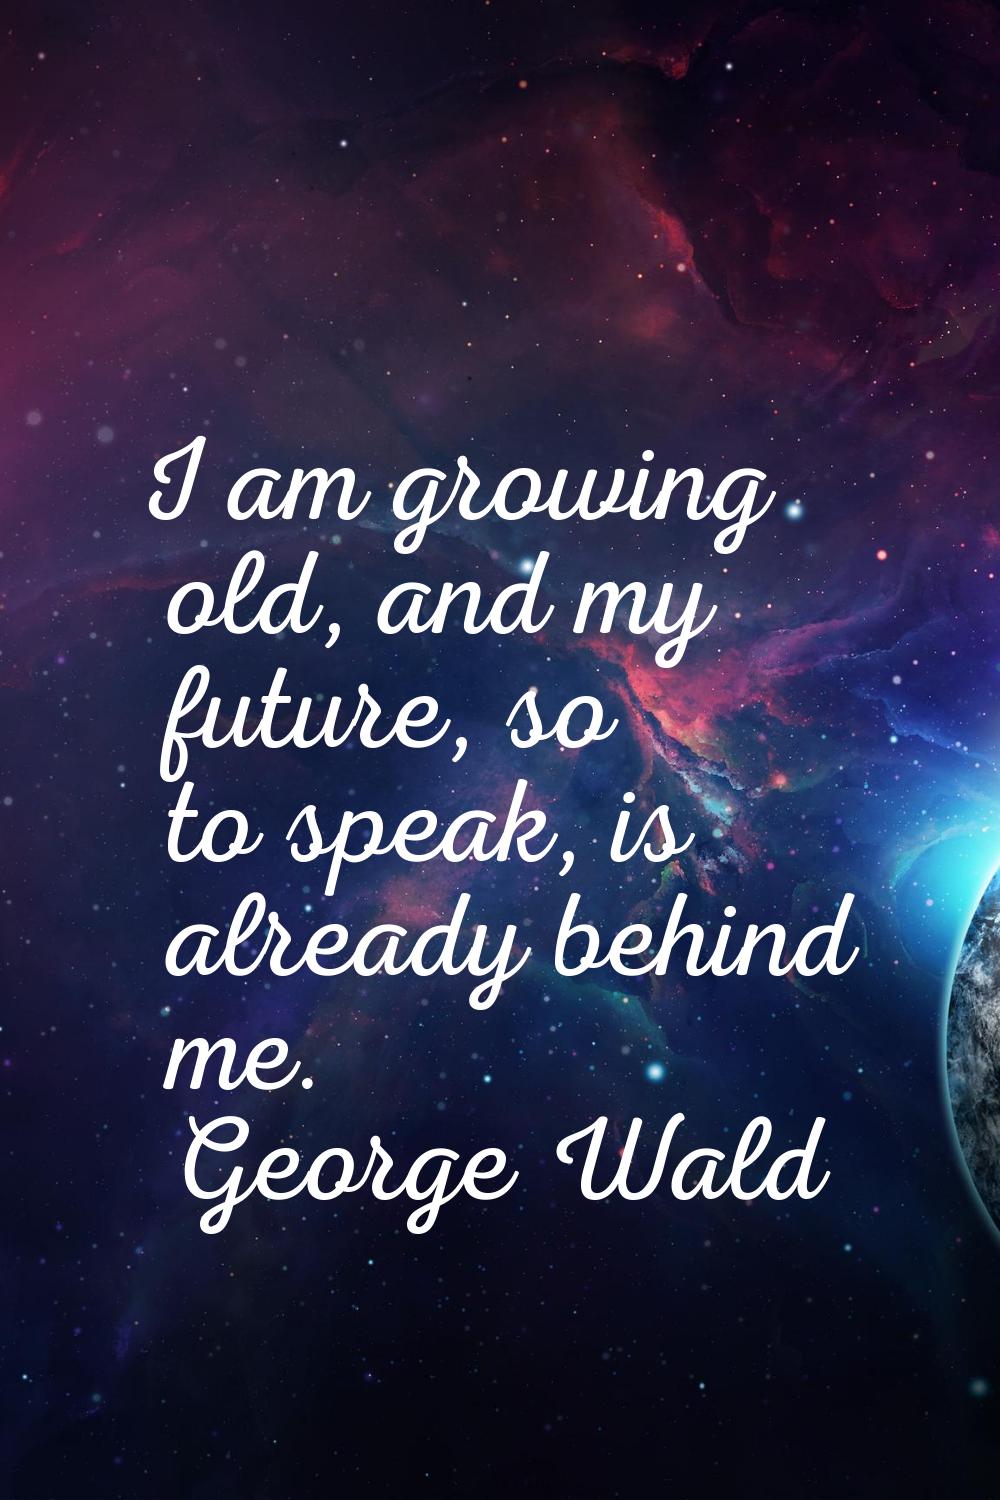 I am growing old, and my future, so to speak, is already behind me.